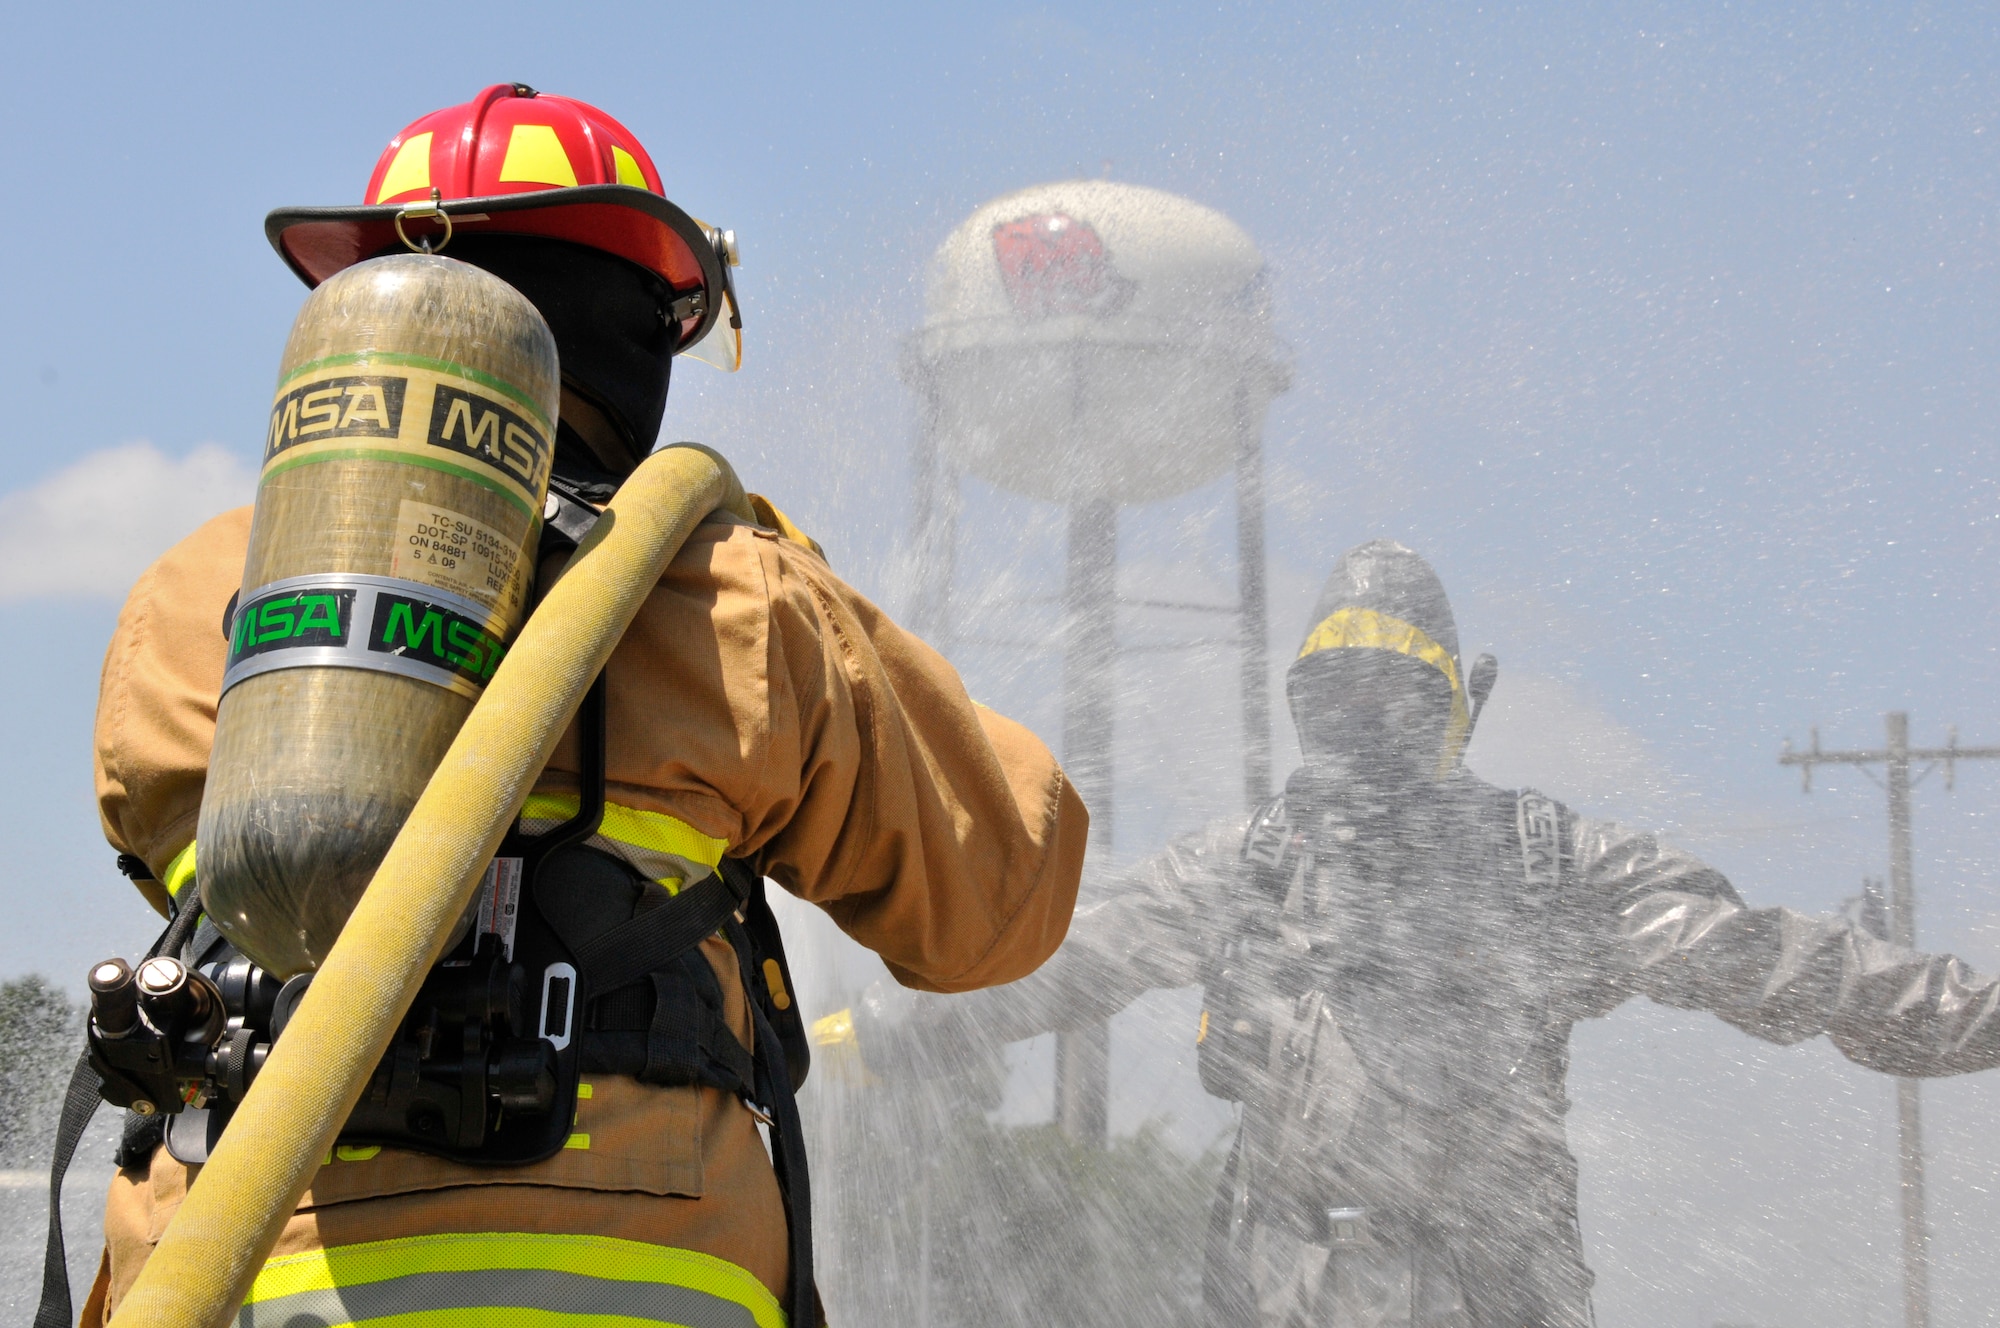 Staff Sgt. Kyle Moore, 188th Fire Emergency Services Flight firefighter, sprays Senior Airman William Fine, 188th Emergency Management journeyman, with water to simulate the decontamination process of a hazardous materials response. Firefighters and emergency management personnel are trained to respond to HAZMAT incidents or other emergency situations on base. (U.S. Air National Guard photo by Staff Sgt. John Suleski/Released)